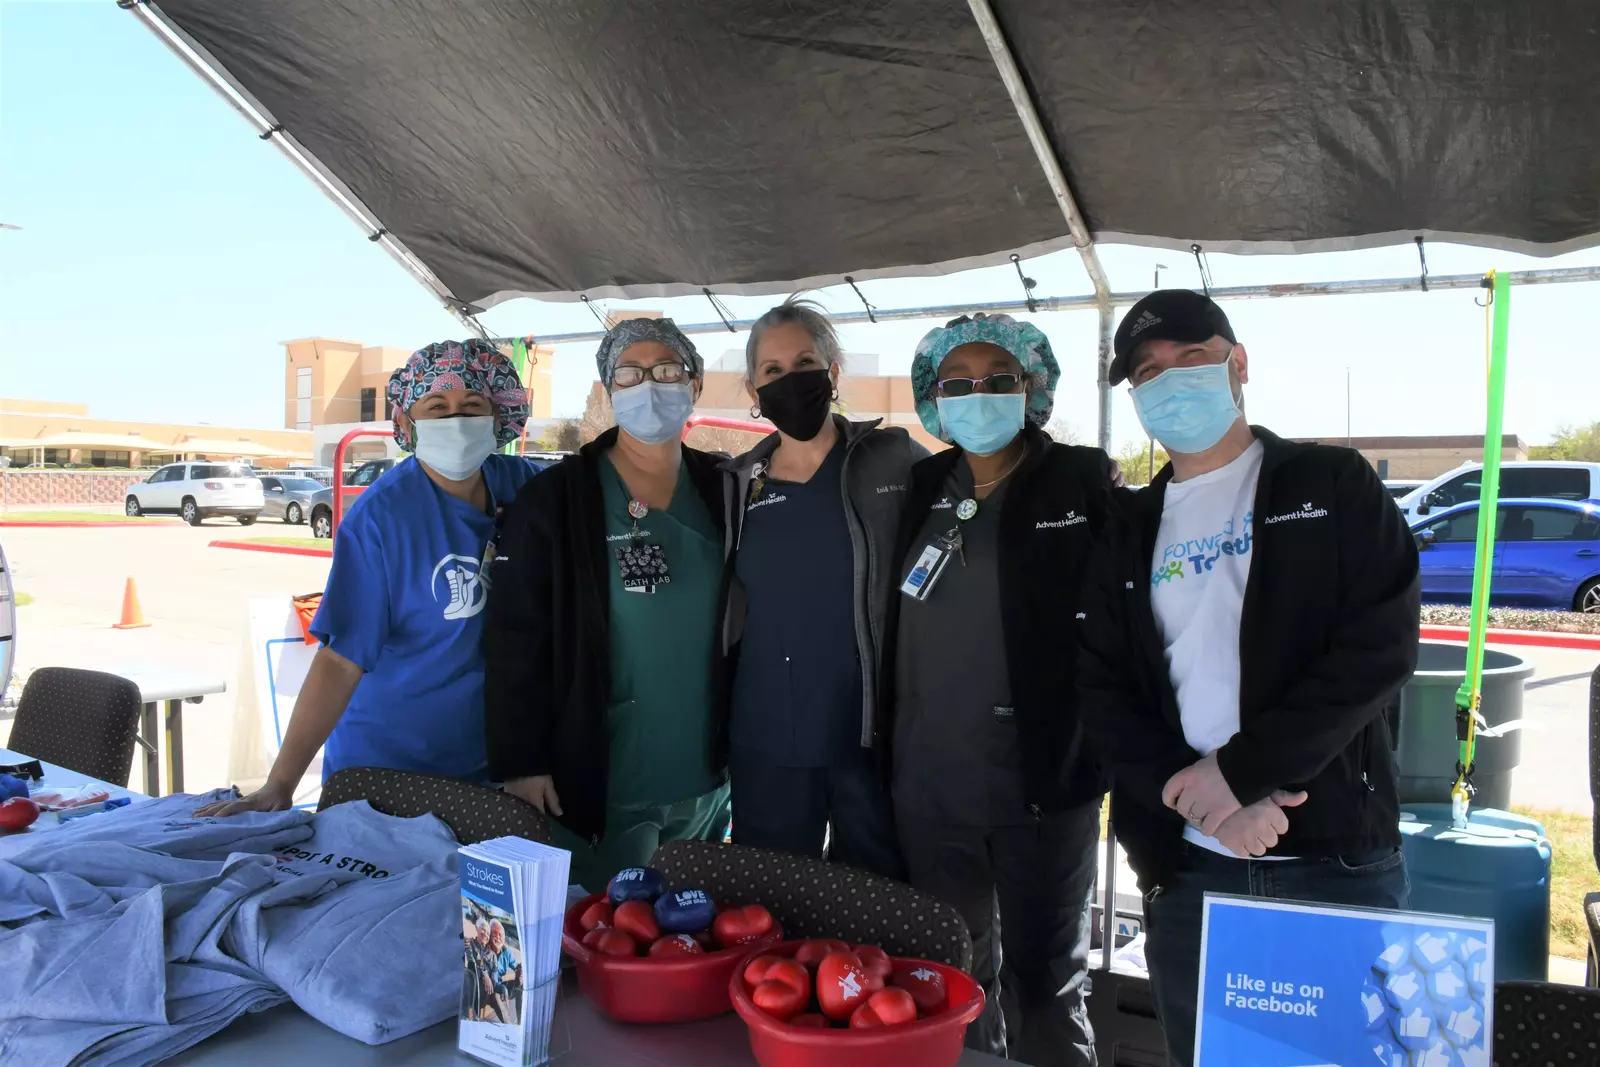 AdventHealth team members put their hearts into volunteer service year-round.